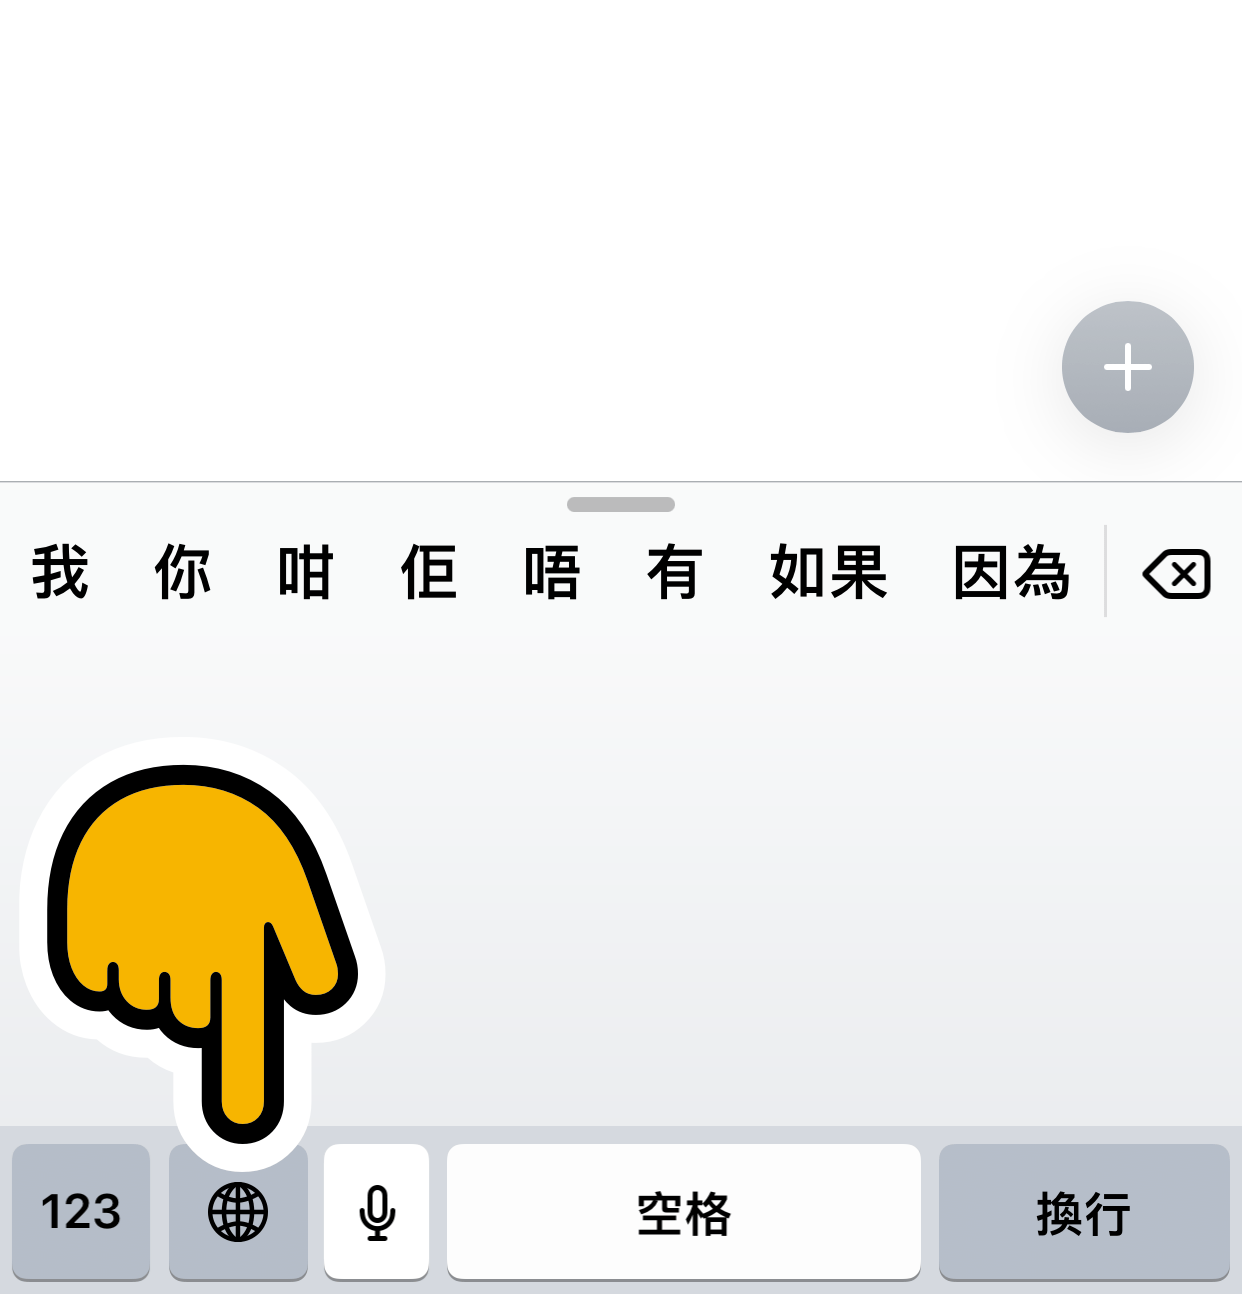 Image showing the iOS Keyboard with an pointed to the Globe Icon Language Selector on the bottom left of the keyboard, to switch Keyboards.